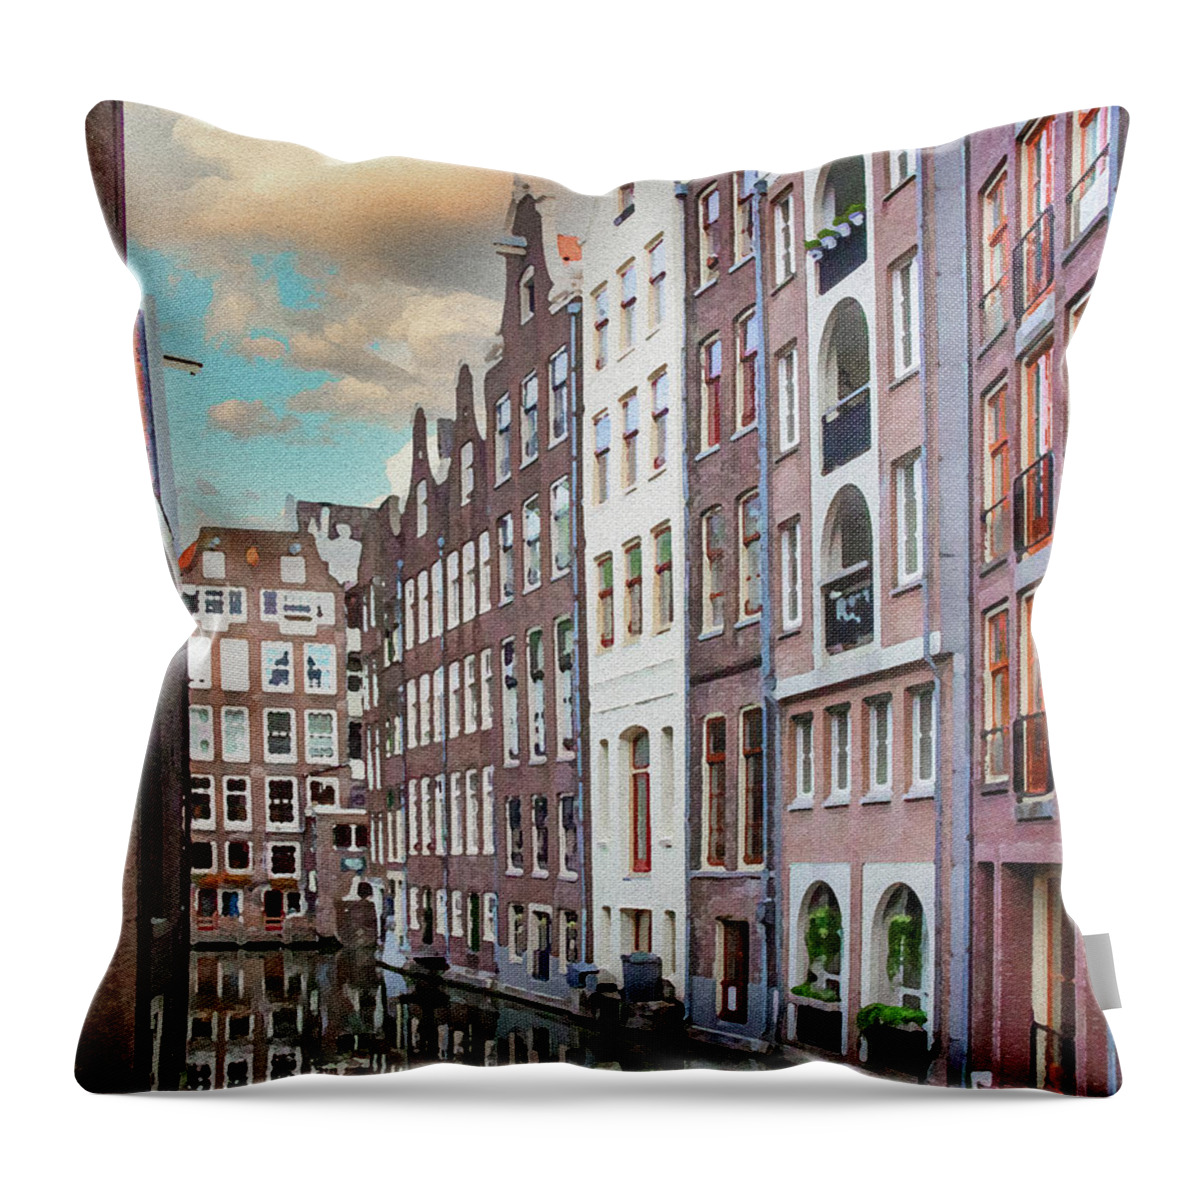 Amsterdam Throw Pillow featuring the digital art Amsterdam Canal Reflection Dry Brush on Sandstone by Ron Long Ltd Photography